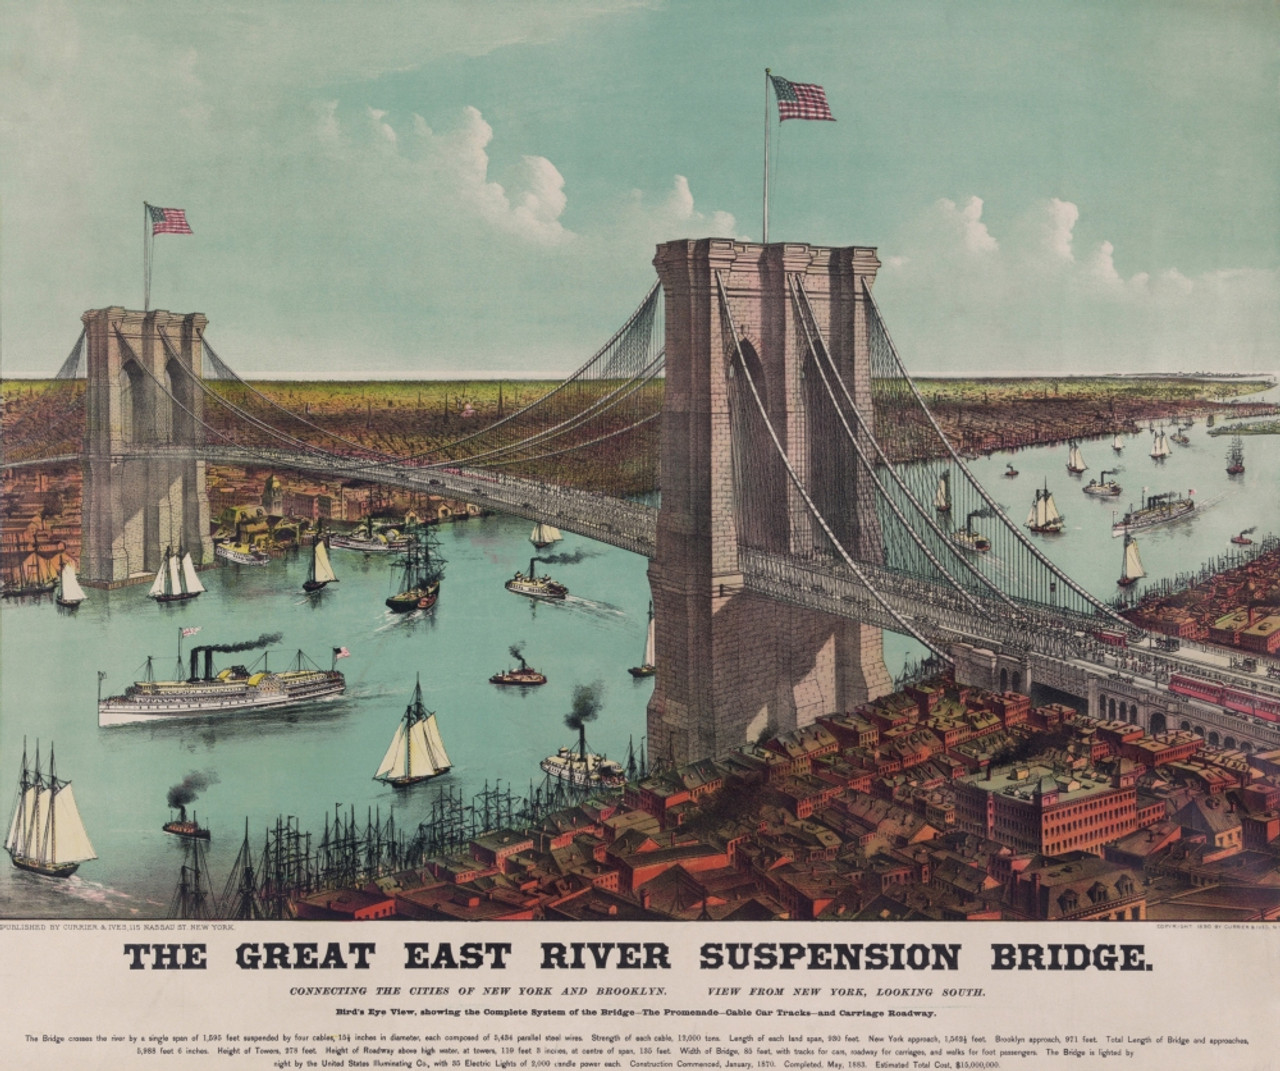 The Brooklyn Bridge Viewed From Promenade Ives. VAREVCHISL023EC020 Car Currier Item By South - Posterazzi And Showing - # Tracks Cable Lc-Dig-Pga-03206 Roadway. Brooklyn Looking History Toward 1890 Carriage Manhattan The Chromolithograph